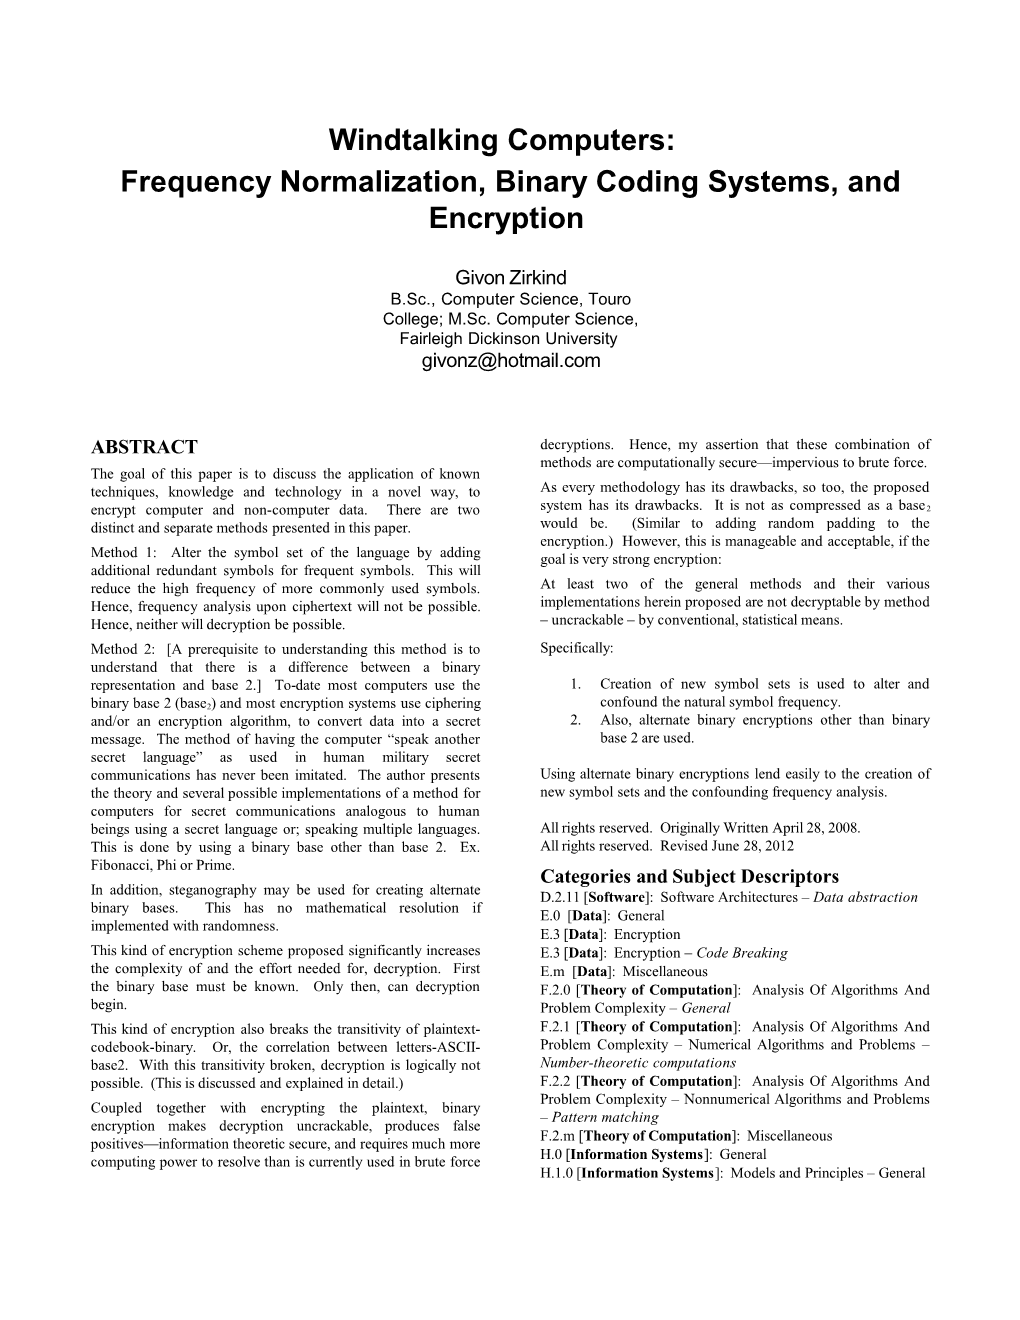 Windtalking Computers: Frequency Normalization, Binary Coding Systems, and Encryption